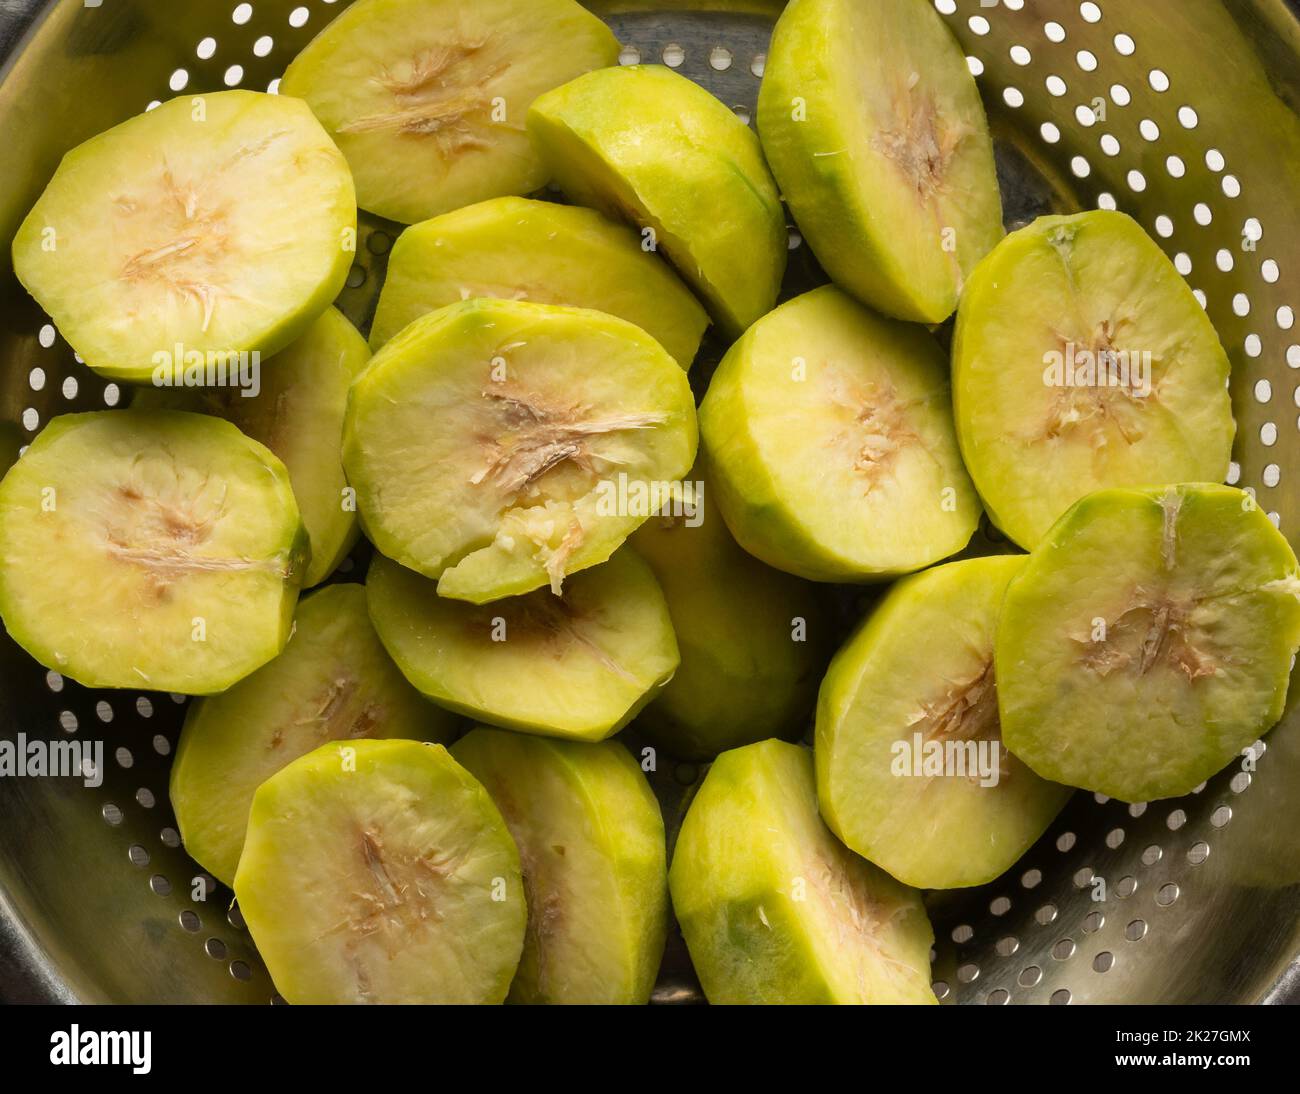 sliced ambarella or june plum, cut and peeled edible fruits in a bowl for making vegetarian condiment or sauce, close-up taken from above Stock Photo